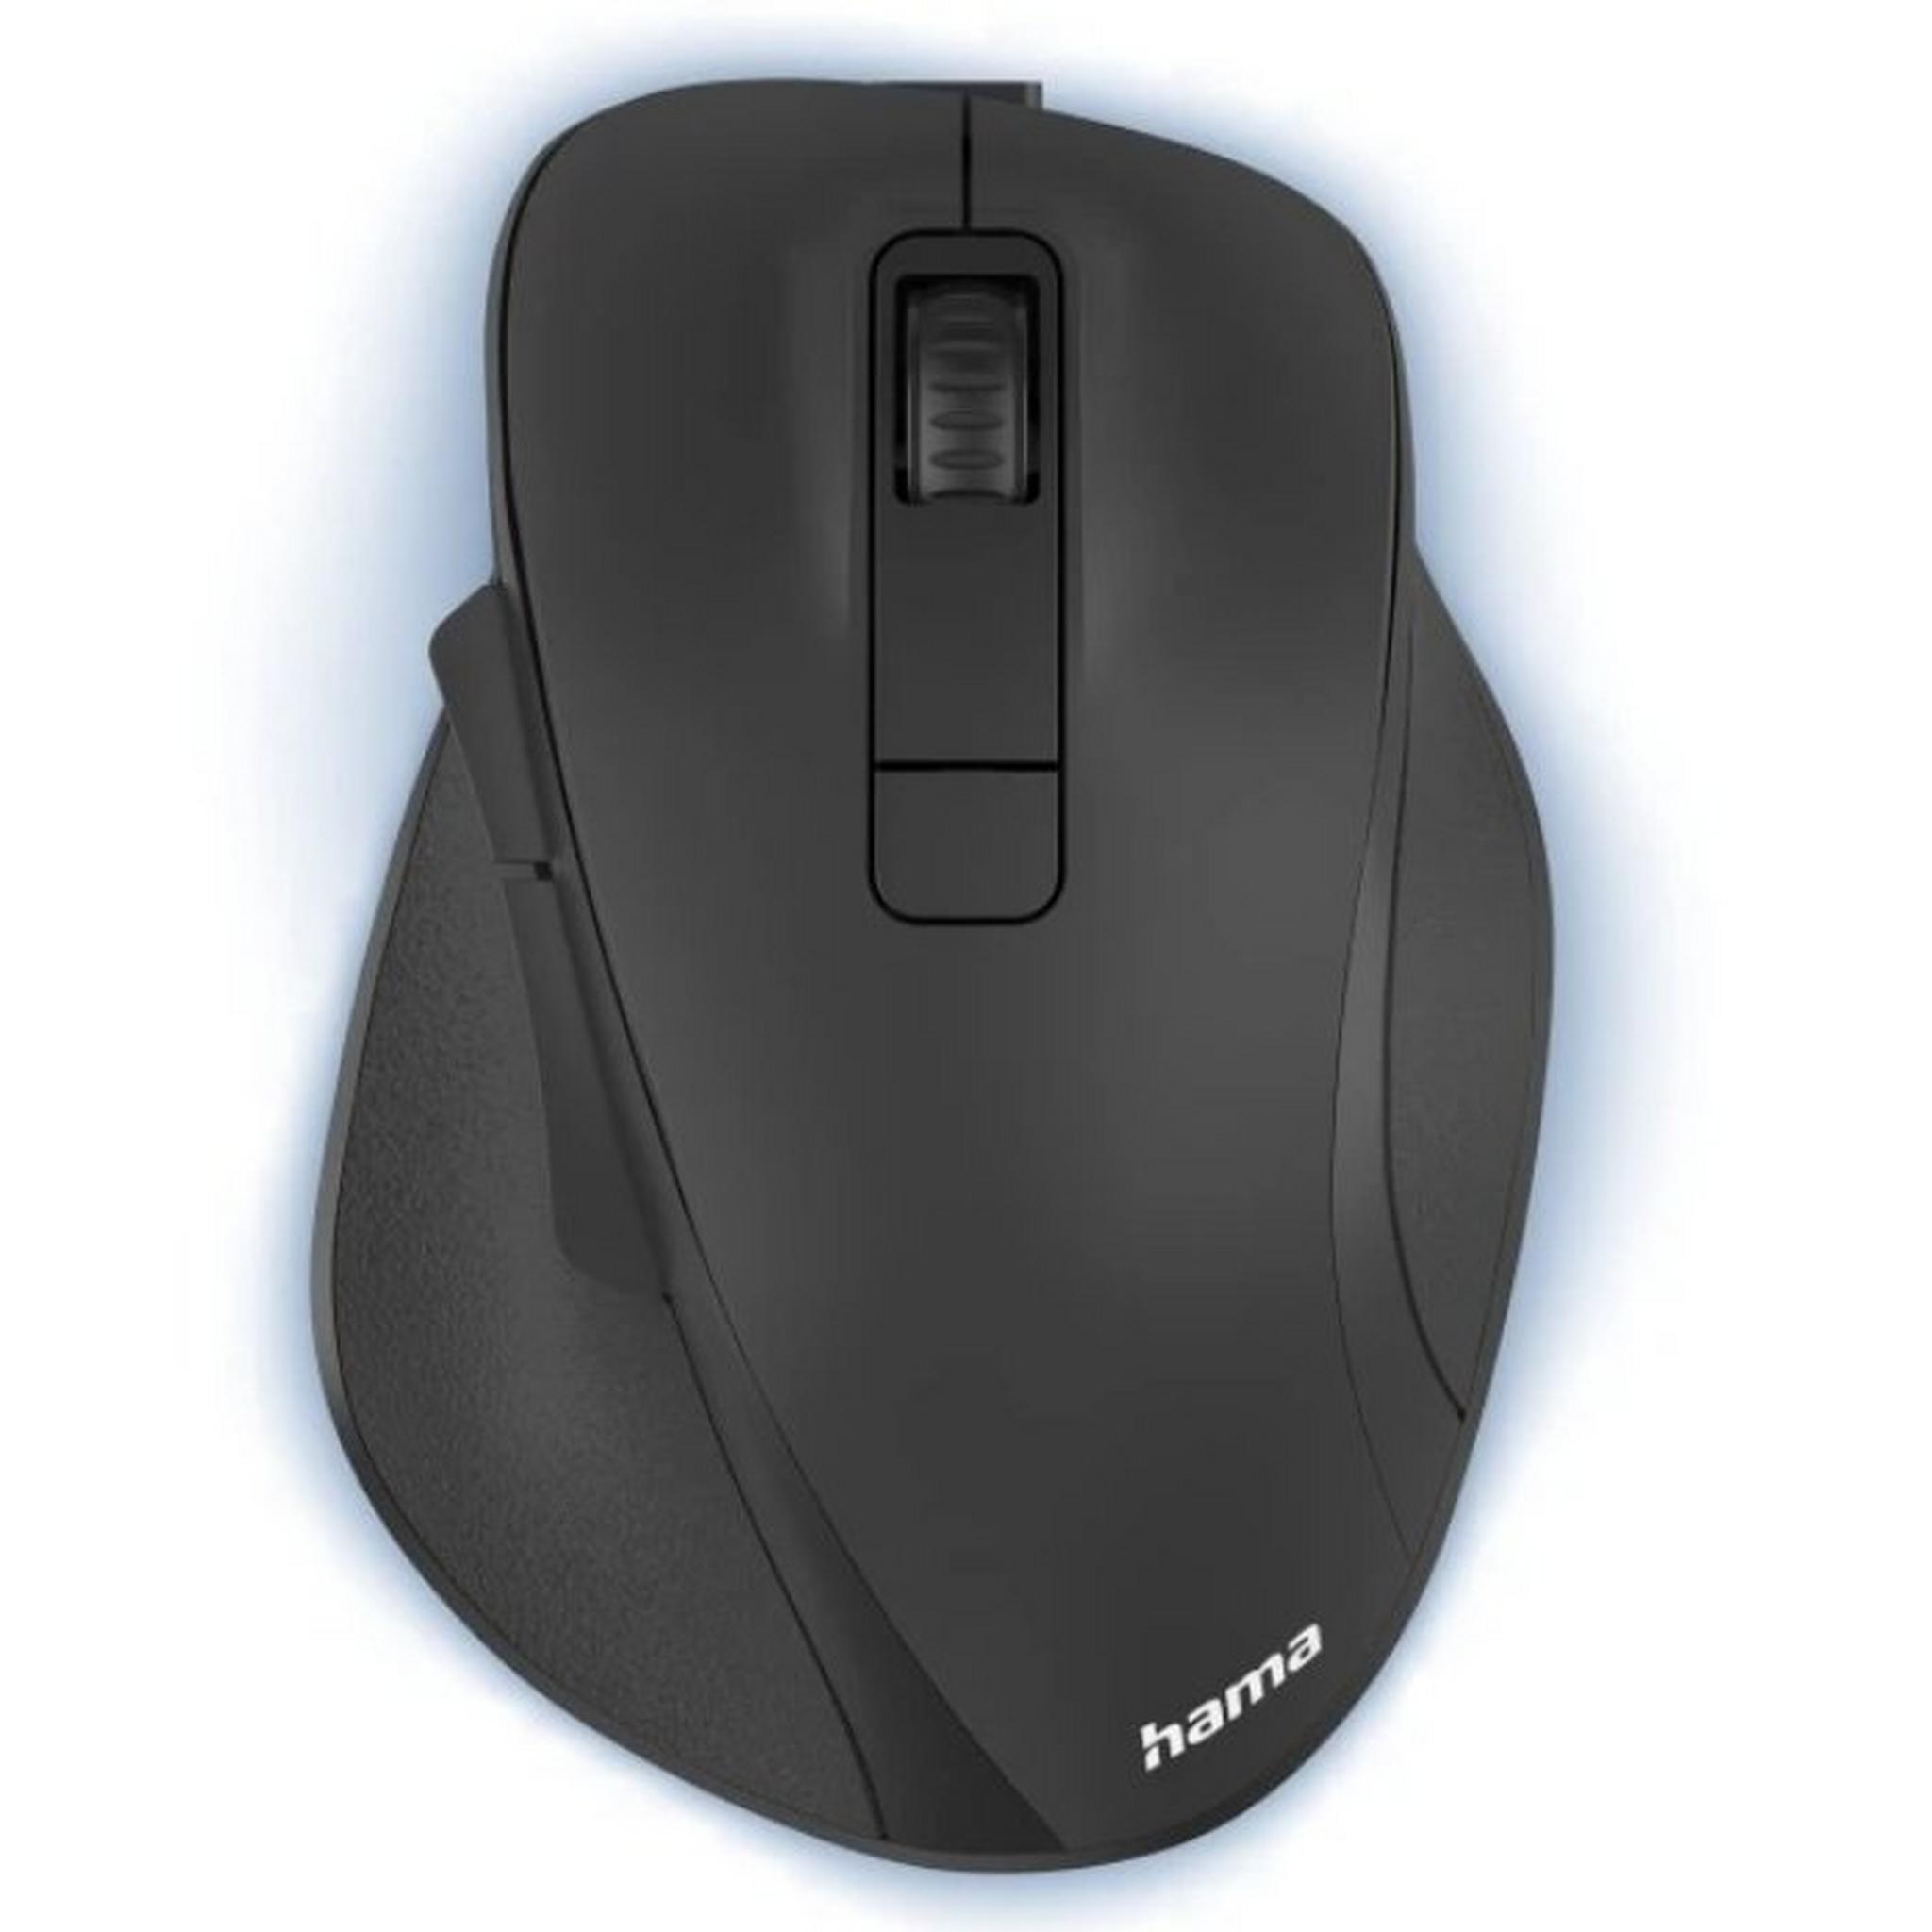 Hama MW-500 Recharge Optical 6-Button Wireless Mouse, 173032 – Black